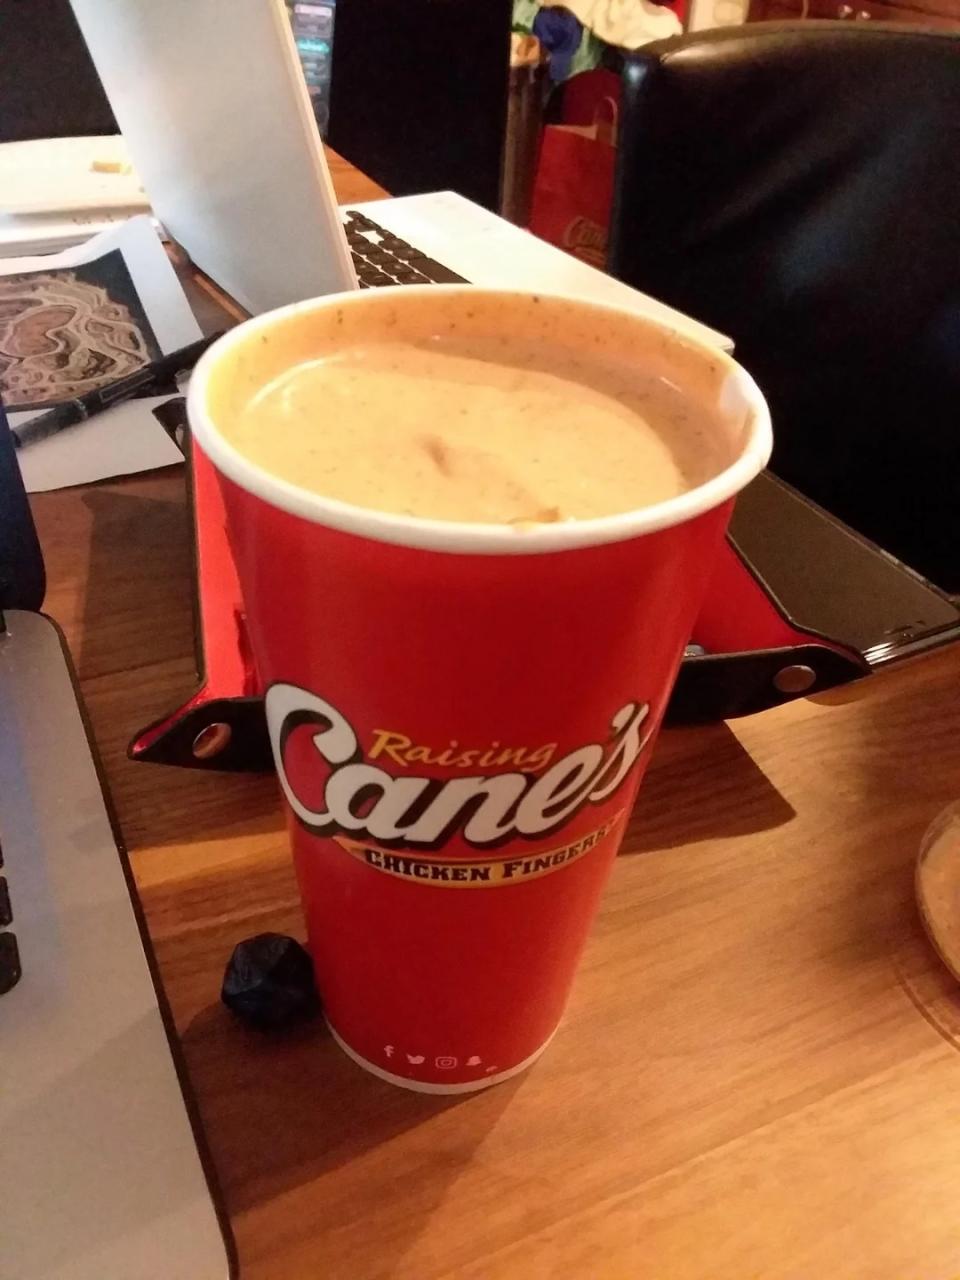 Raising Cane's cup filled with sauce on a desk with a laptop in the background